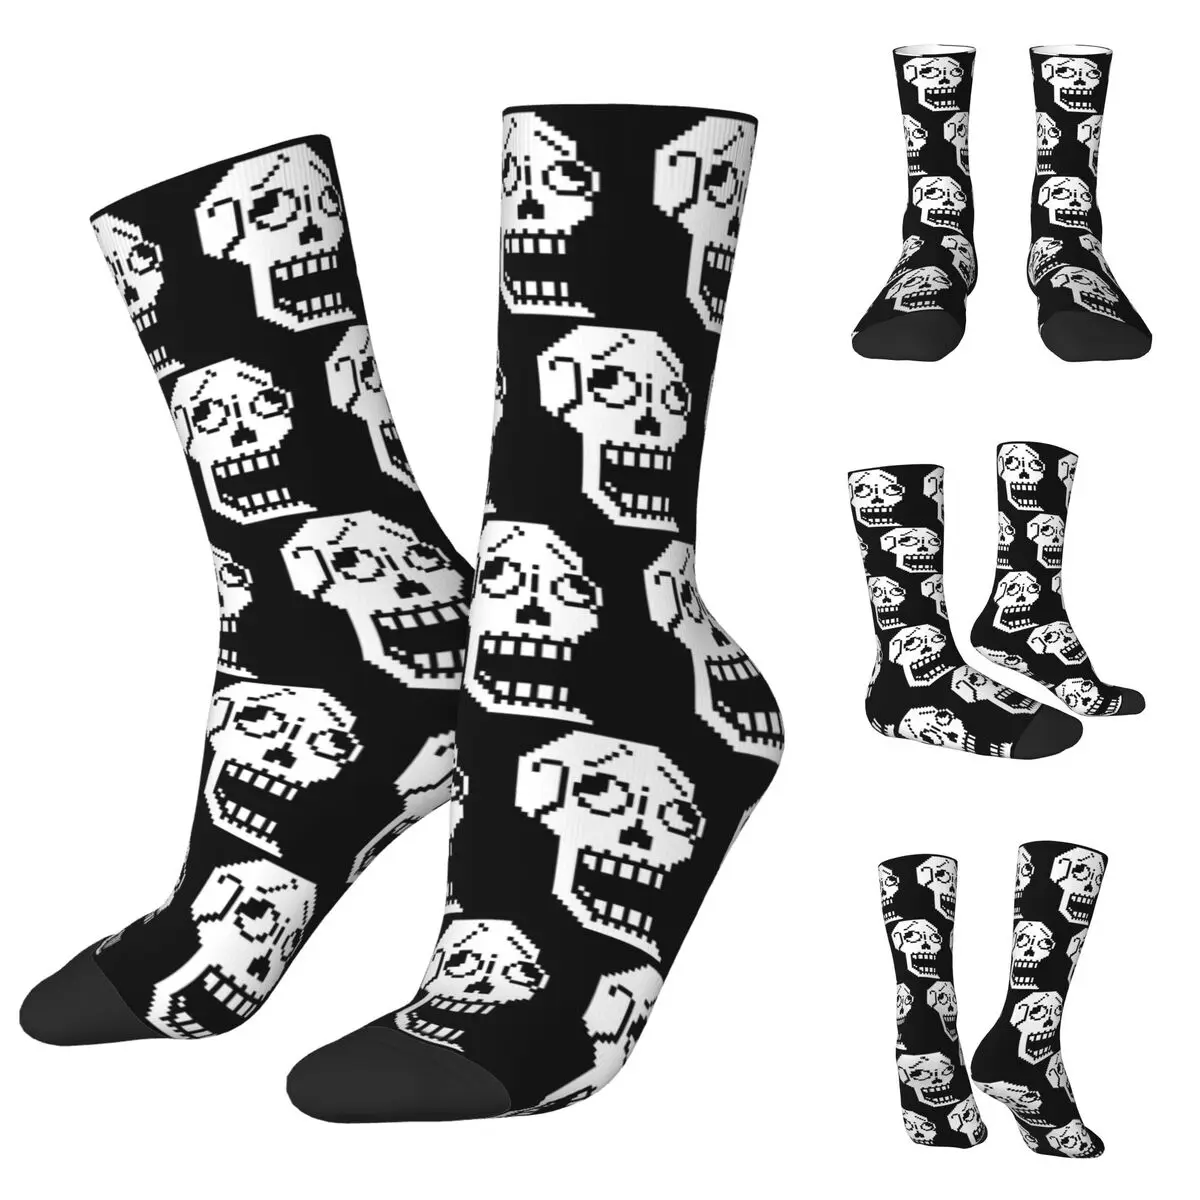 Sans And Papyrus Sprites Undertale Napstablook Men and Women printing Socks,Windproof Applicable throughout the year xx art nouveau papyrus